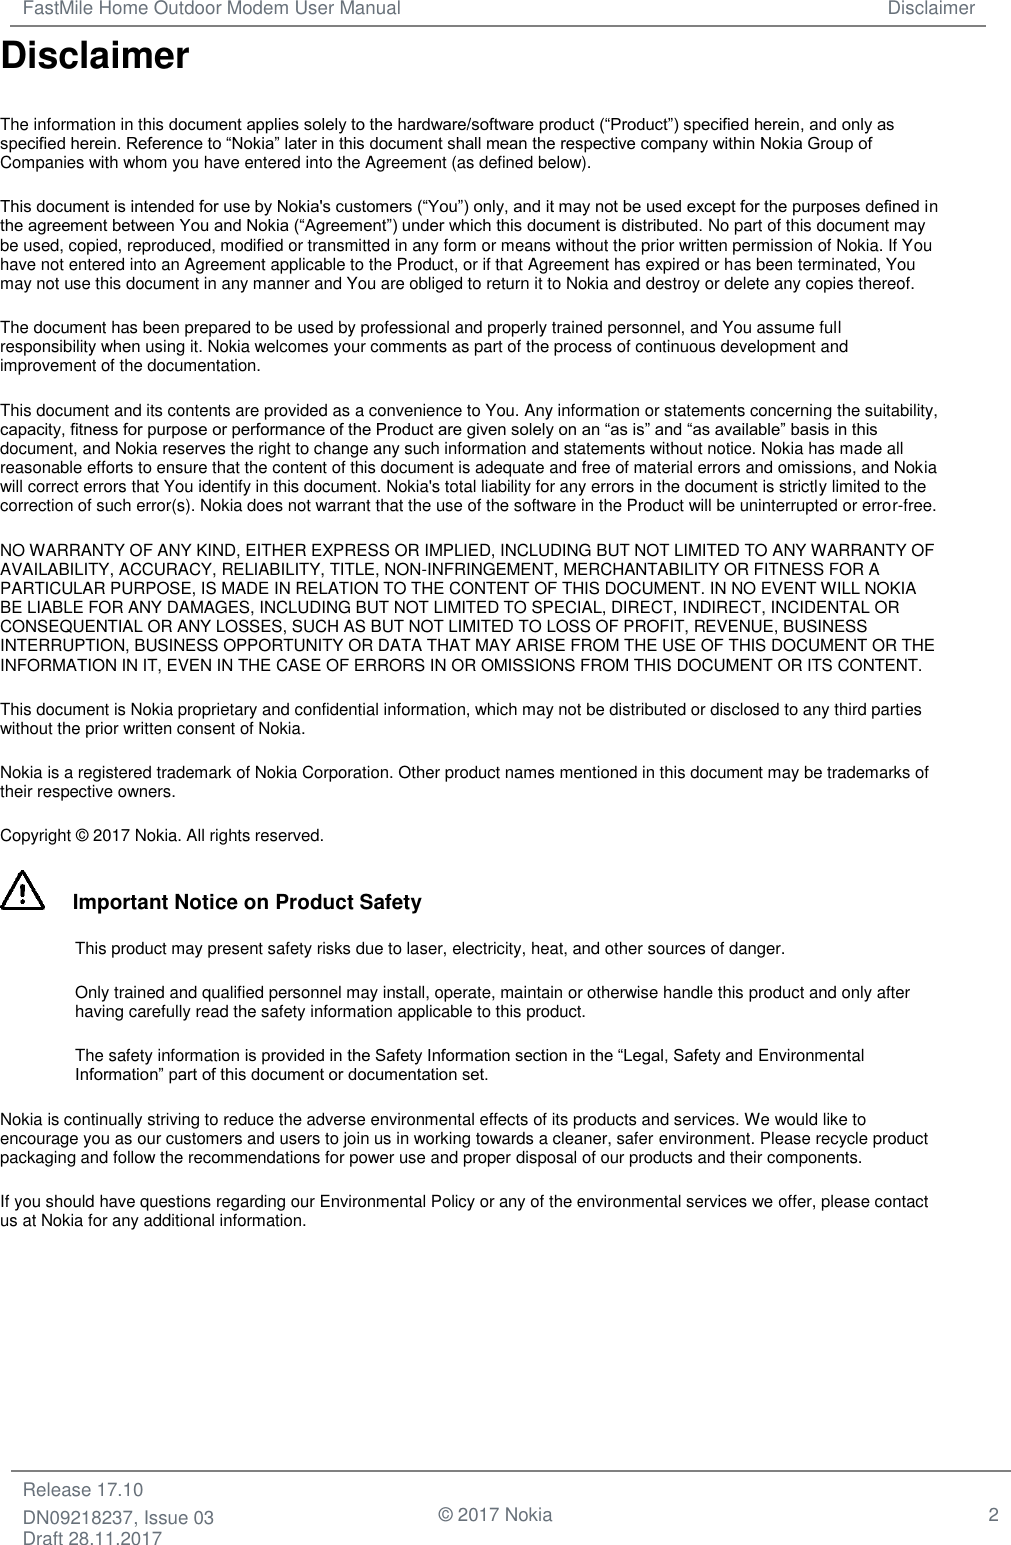 FastMile Home Outdoor Modem User Manual Disclaimer  Release 17.10 DN09218237, Issue 03 Draft 28.11.2017                                © 2017 Nokia 2  Disclaimer The information in this document applies solely to the hardware/software product (“Product”) specified herein, and only as specified herein. Reference to “Nokia” later in this document shall mean the respective company within Nokia Group of Companies with whom you have entered into the Agreement (as defined below). This document is intended for use by Nokia&apos;s customers (“You”) only, and it may not be used except for the purposes defined in the agreement between You and Nokia (“Agreement”) under which this document is distributed. No part of this document may be used, copied, reproduced, modified or transmitted in any form or means without the prior written permission of Nokia. If You have not entered into an Agreement applicable to the Product, or if that Agreement has expired or has been terminated, You may not use this document in any manner and You are obliged to return it to Nokia and destroy or delete any copies thereof. The document has been prepared to be used by professional and properly trained personnel, and You assume full responsibility when using it. Nokia welcomes your comments as part of the process of continuous development and improvement of the documentation. This document and its contents are provided as a convenience to You. Any information or statements concerning the suitability, capacity, fitness for purpose or performance of the Product are given solely on an “as is” and “as available” basis in this document, and Nokia reserves the right to change any such information and statements without notice. Nokia has made all reasonable efforts to ensure that the content of this document is adequate and free of material errors and omissions, and Nokia will correct errors that You identify in this document. Nokia&apos;s total liability for any errors in the document is strictly limited to the correction of such error(s). Nokia does not warrant that the use of the software in the Product will be uninterrupted or error-free. NO WARRANTY OF ANY KIND, EITHER EXPRESS OR IMPLIED, INCLUDING BUT NOT LIMITED TO ANY WARRANTY OF AVAILABILITY, ACCURACY, RELIABILITY, TITLE, NON-INFRINGEMENT, MERCHANTABILITY OR FITNESS FOR A PARTICULAR PURPOSE, IS MADE IN RELATION TO THE CONTENT OF THIS DOCUMENT. IN NO EVENT WILL NOKIA BE LIABLE FOR ANY DAMAGES, INCLUDING BUT NOT LIMITED TO SPECIAL, DIRECT, INDIRECT, INCIDENTAL OR CONSEQUENTIAL OR ANY LOSSES, SUCH AS BUT NOT LIMITED TO LOSS OF PROFIT, REVENUE, BUSINESS INTERRUPTION, BUSINESS OPPORTUNITY OR DATA THAT MAY ARISE FROM THE USE OF THIS DOCUMENT OR THE INFORMATION IN IT, EVEN IN THE CASE OF ERRORS IN OR OMISSIONS FROM THIS DOCUMENT OR ITS CONTENT.  This document is Nokia proprietary and confidential information, which may not be distributed or disclosed to any third parties without the prior written consent of Nokia. Nokia is a registered trademark of Nokia Corporation. Other product names mentioned in this document may be trademarks of their respective owners. Copyright © 2017 Nokia. All rights reserved.      Important Notice on Product Safety This product may present safety risks due to laser, electricity, heat, and other sources of danger. Only trained and qualified personnel may install, operate, maintain or otherwise handle this product and only after having carefully read the safety information applicable to this product. The safety information is provided in the Safety Information section in the “Legal, Safety and Environmental Information” part of this document or documentation set. Nokia is continually striving to reduce the adverse environmental effects of its products and services. We would like to encourage you as our customers and users to join us in working towards a cleaner, safer environment. Please recycle product packaging and follow the recommendations for power use and proper disposal of our products and their components. If you should have questions regarding our Environmental Policy or any of the environmental services we offer, please contact us at Nokia for any additional information.     